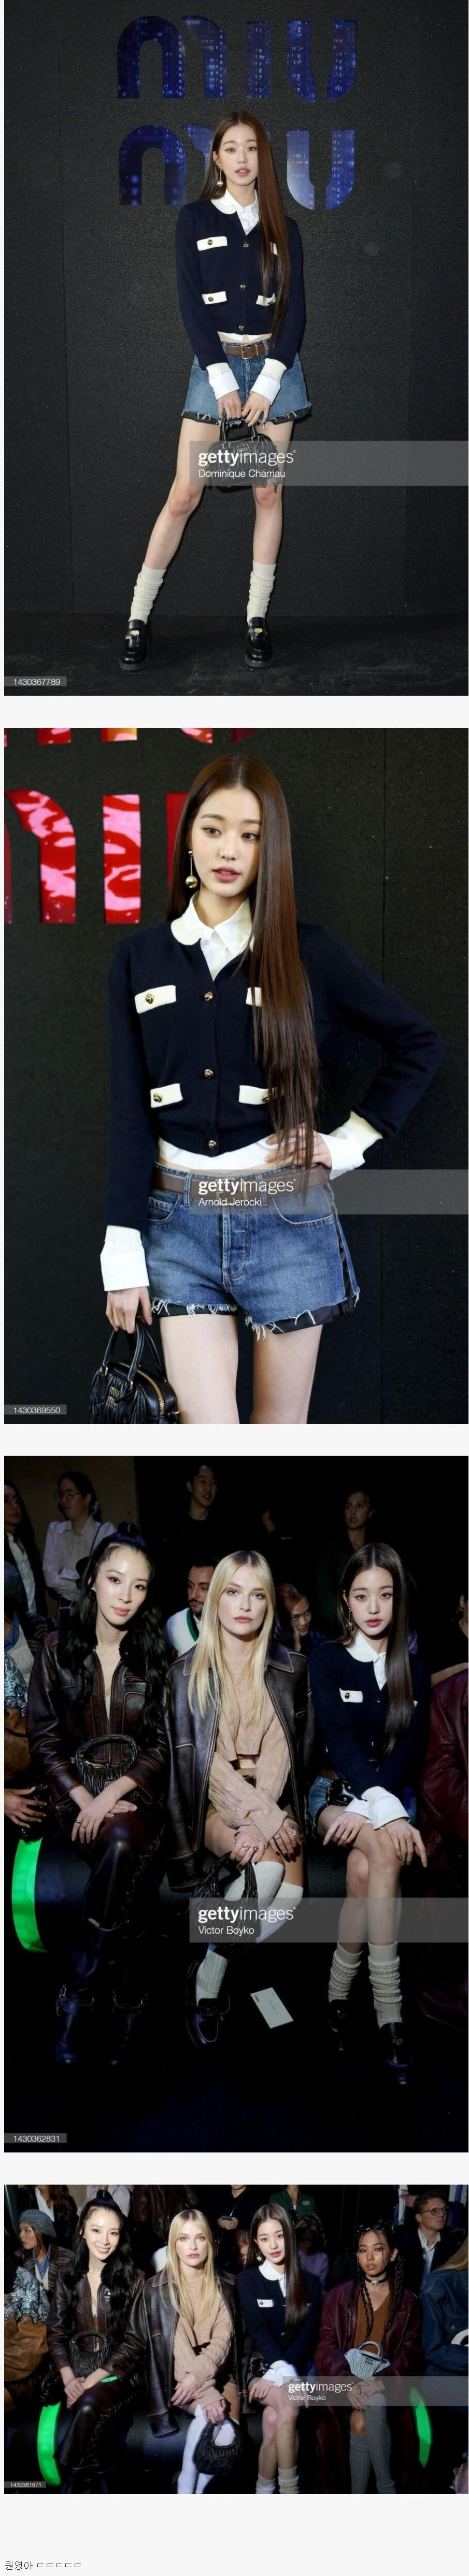 Jang Wonyoung's Paris Getty Images that are popular in Yeocho